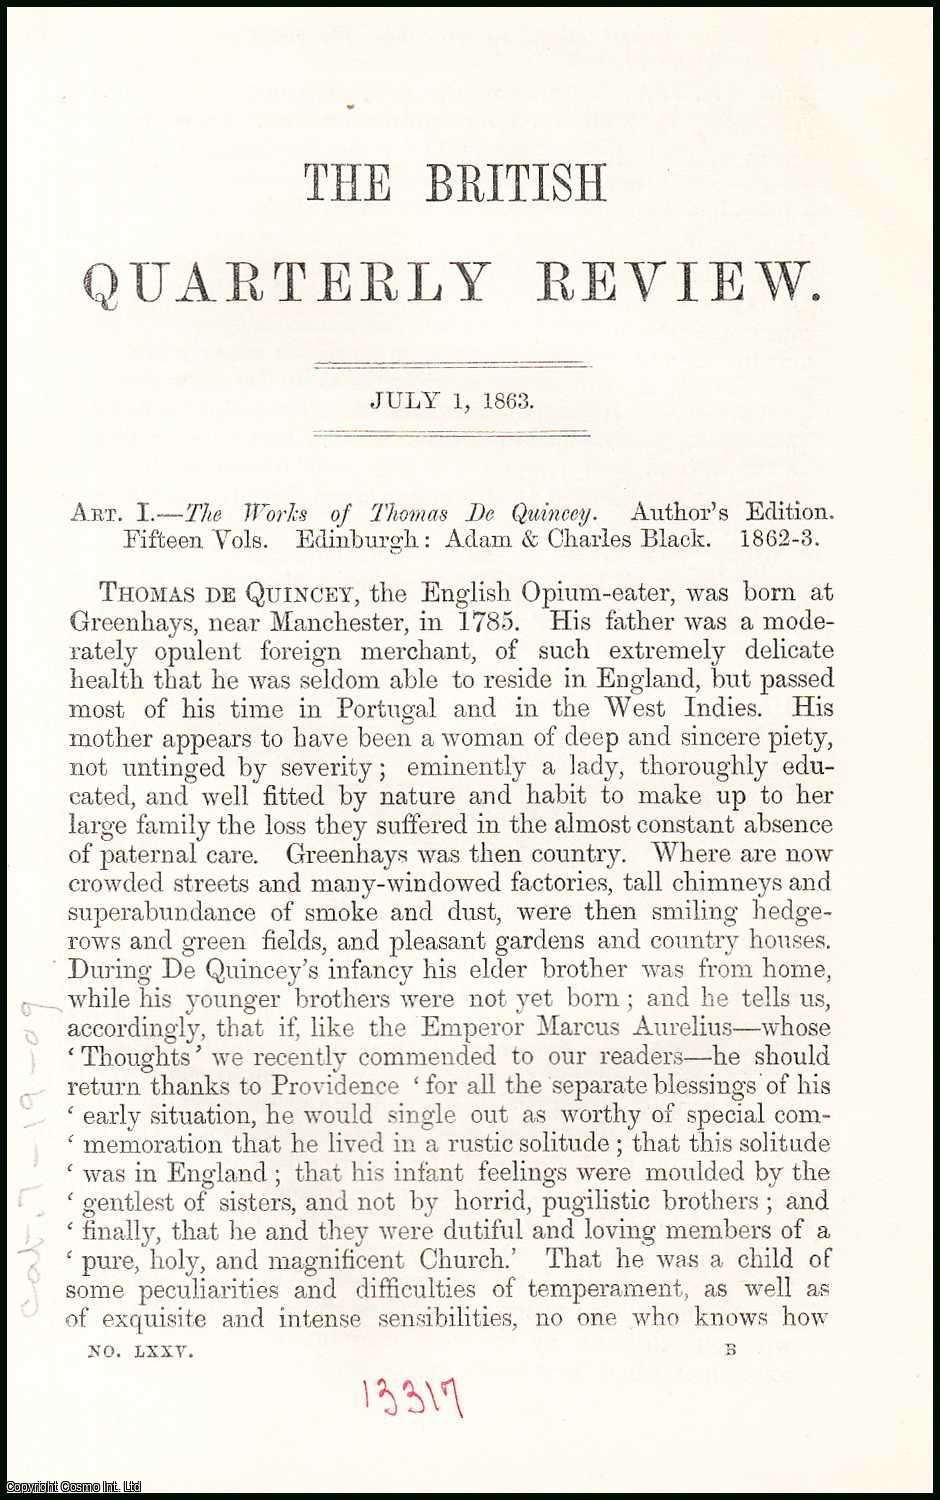 Author Unknown - The Works of Thomas De Quincey and his Writings. A rare original article from the British Quarterly Review, 1863.